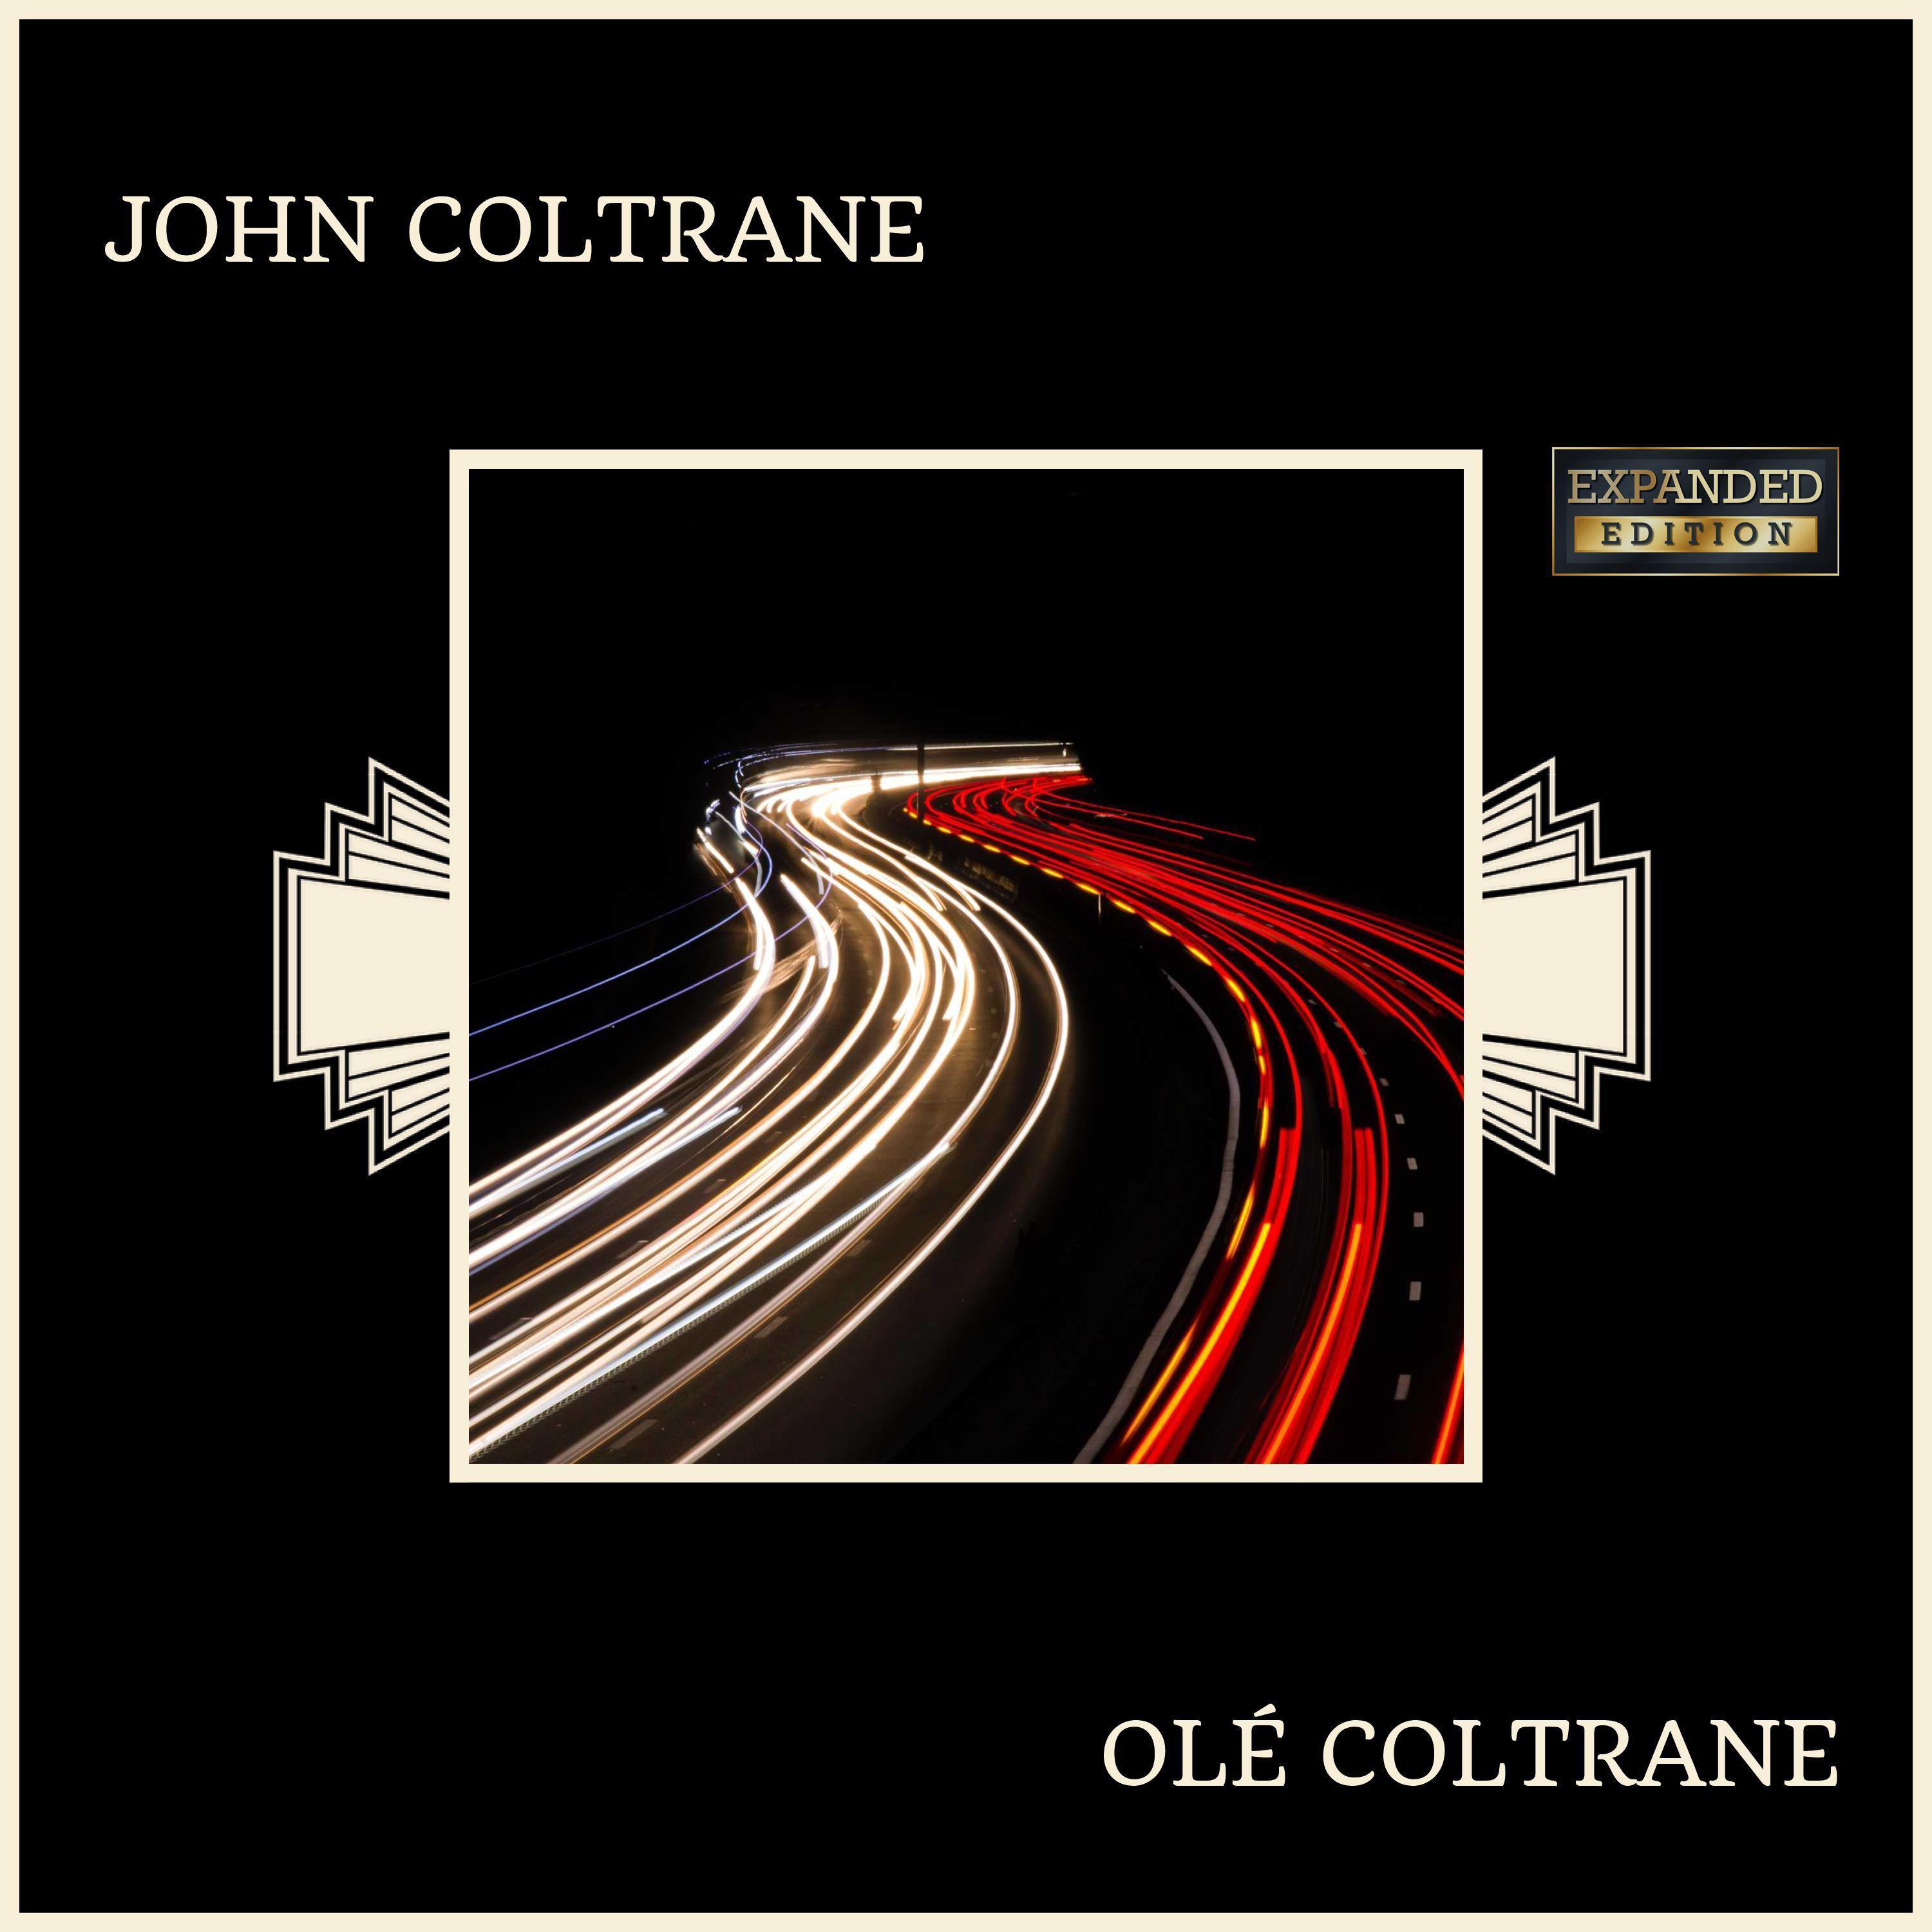 Ole Coltrane Expanded Edition